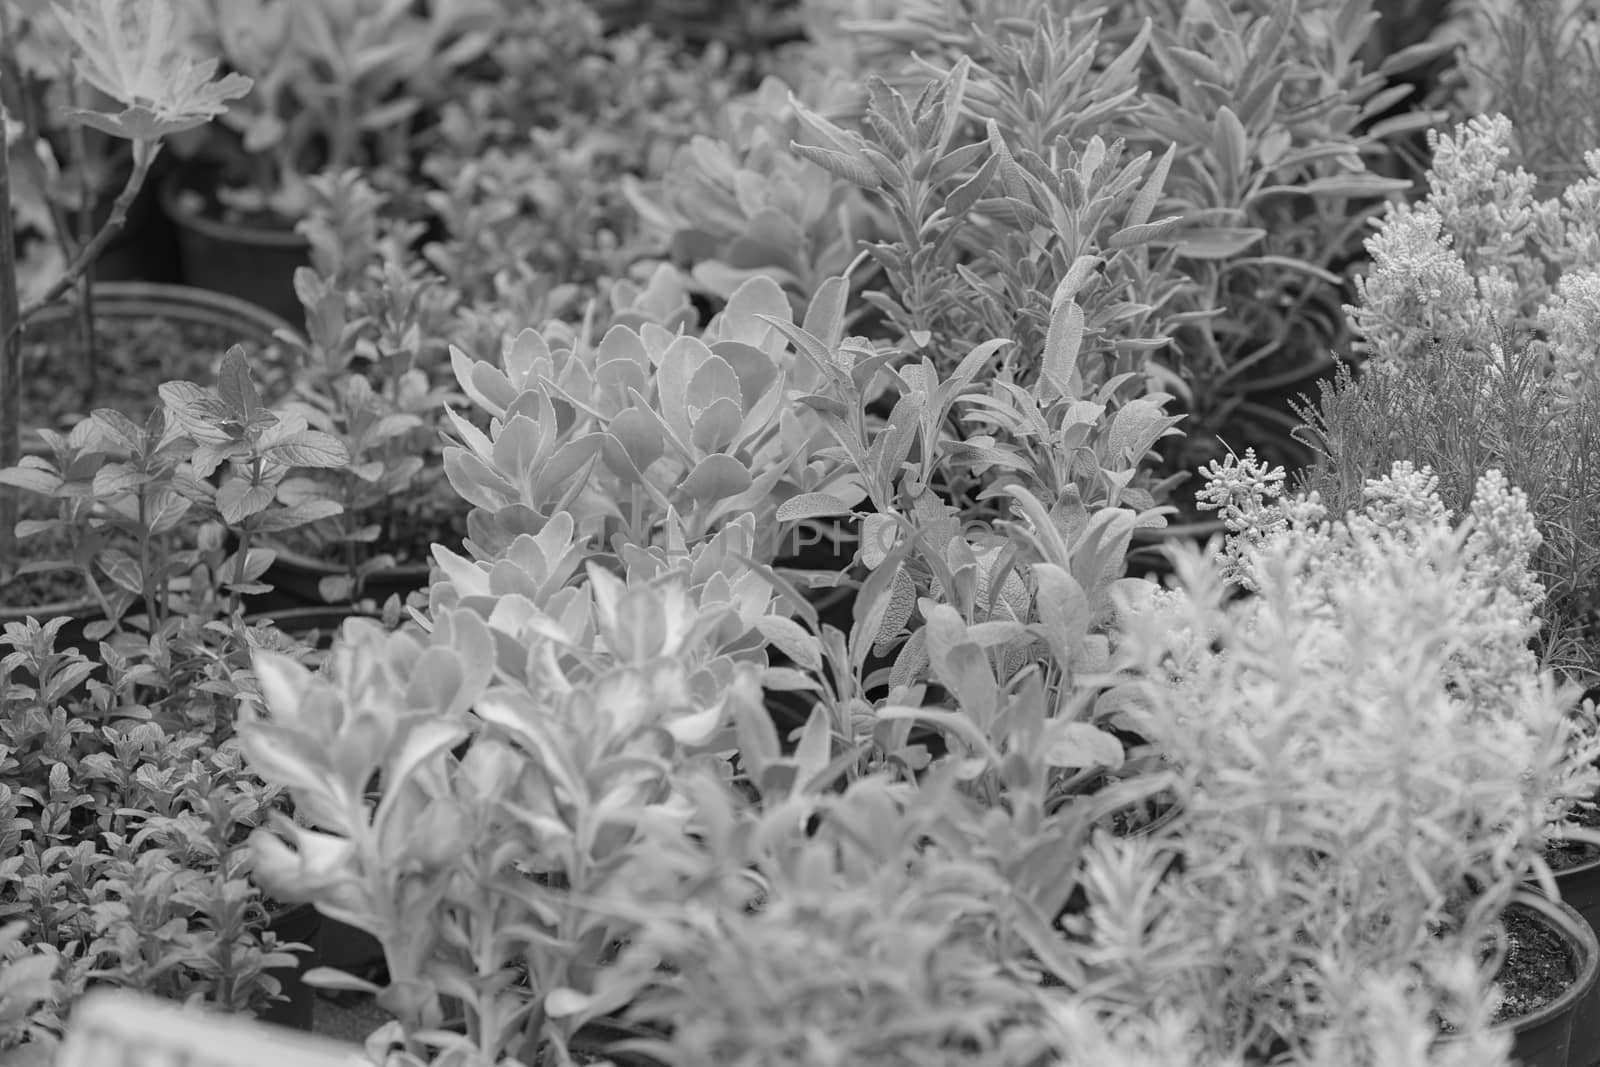 kinds of herbs in pots, note shallow depth of field